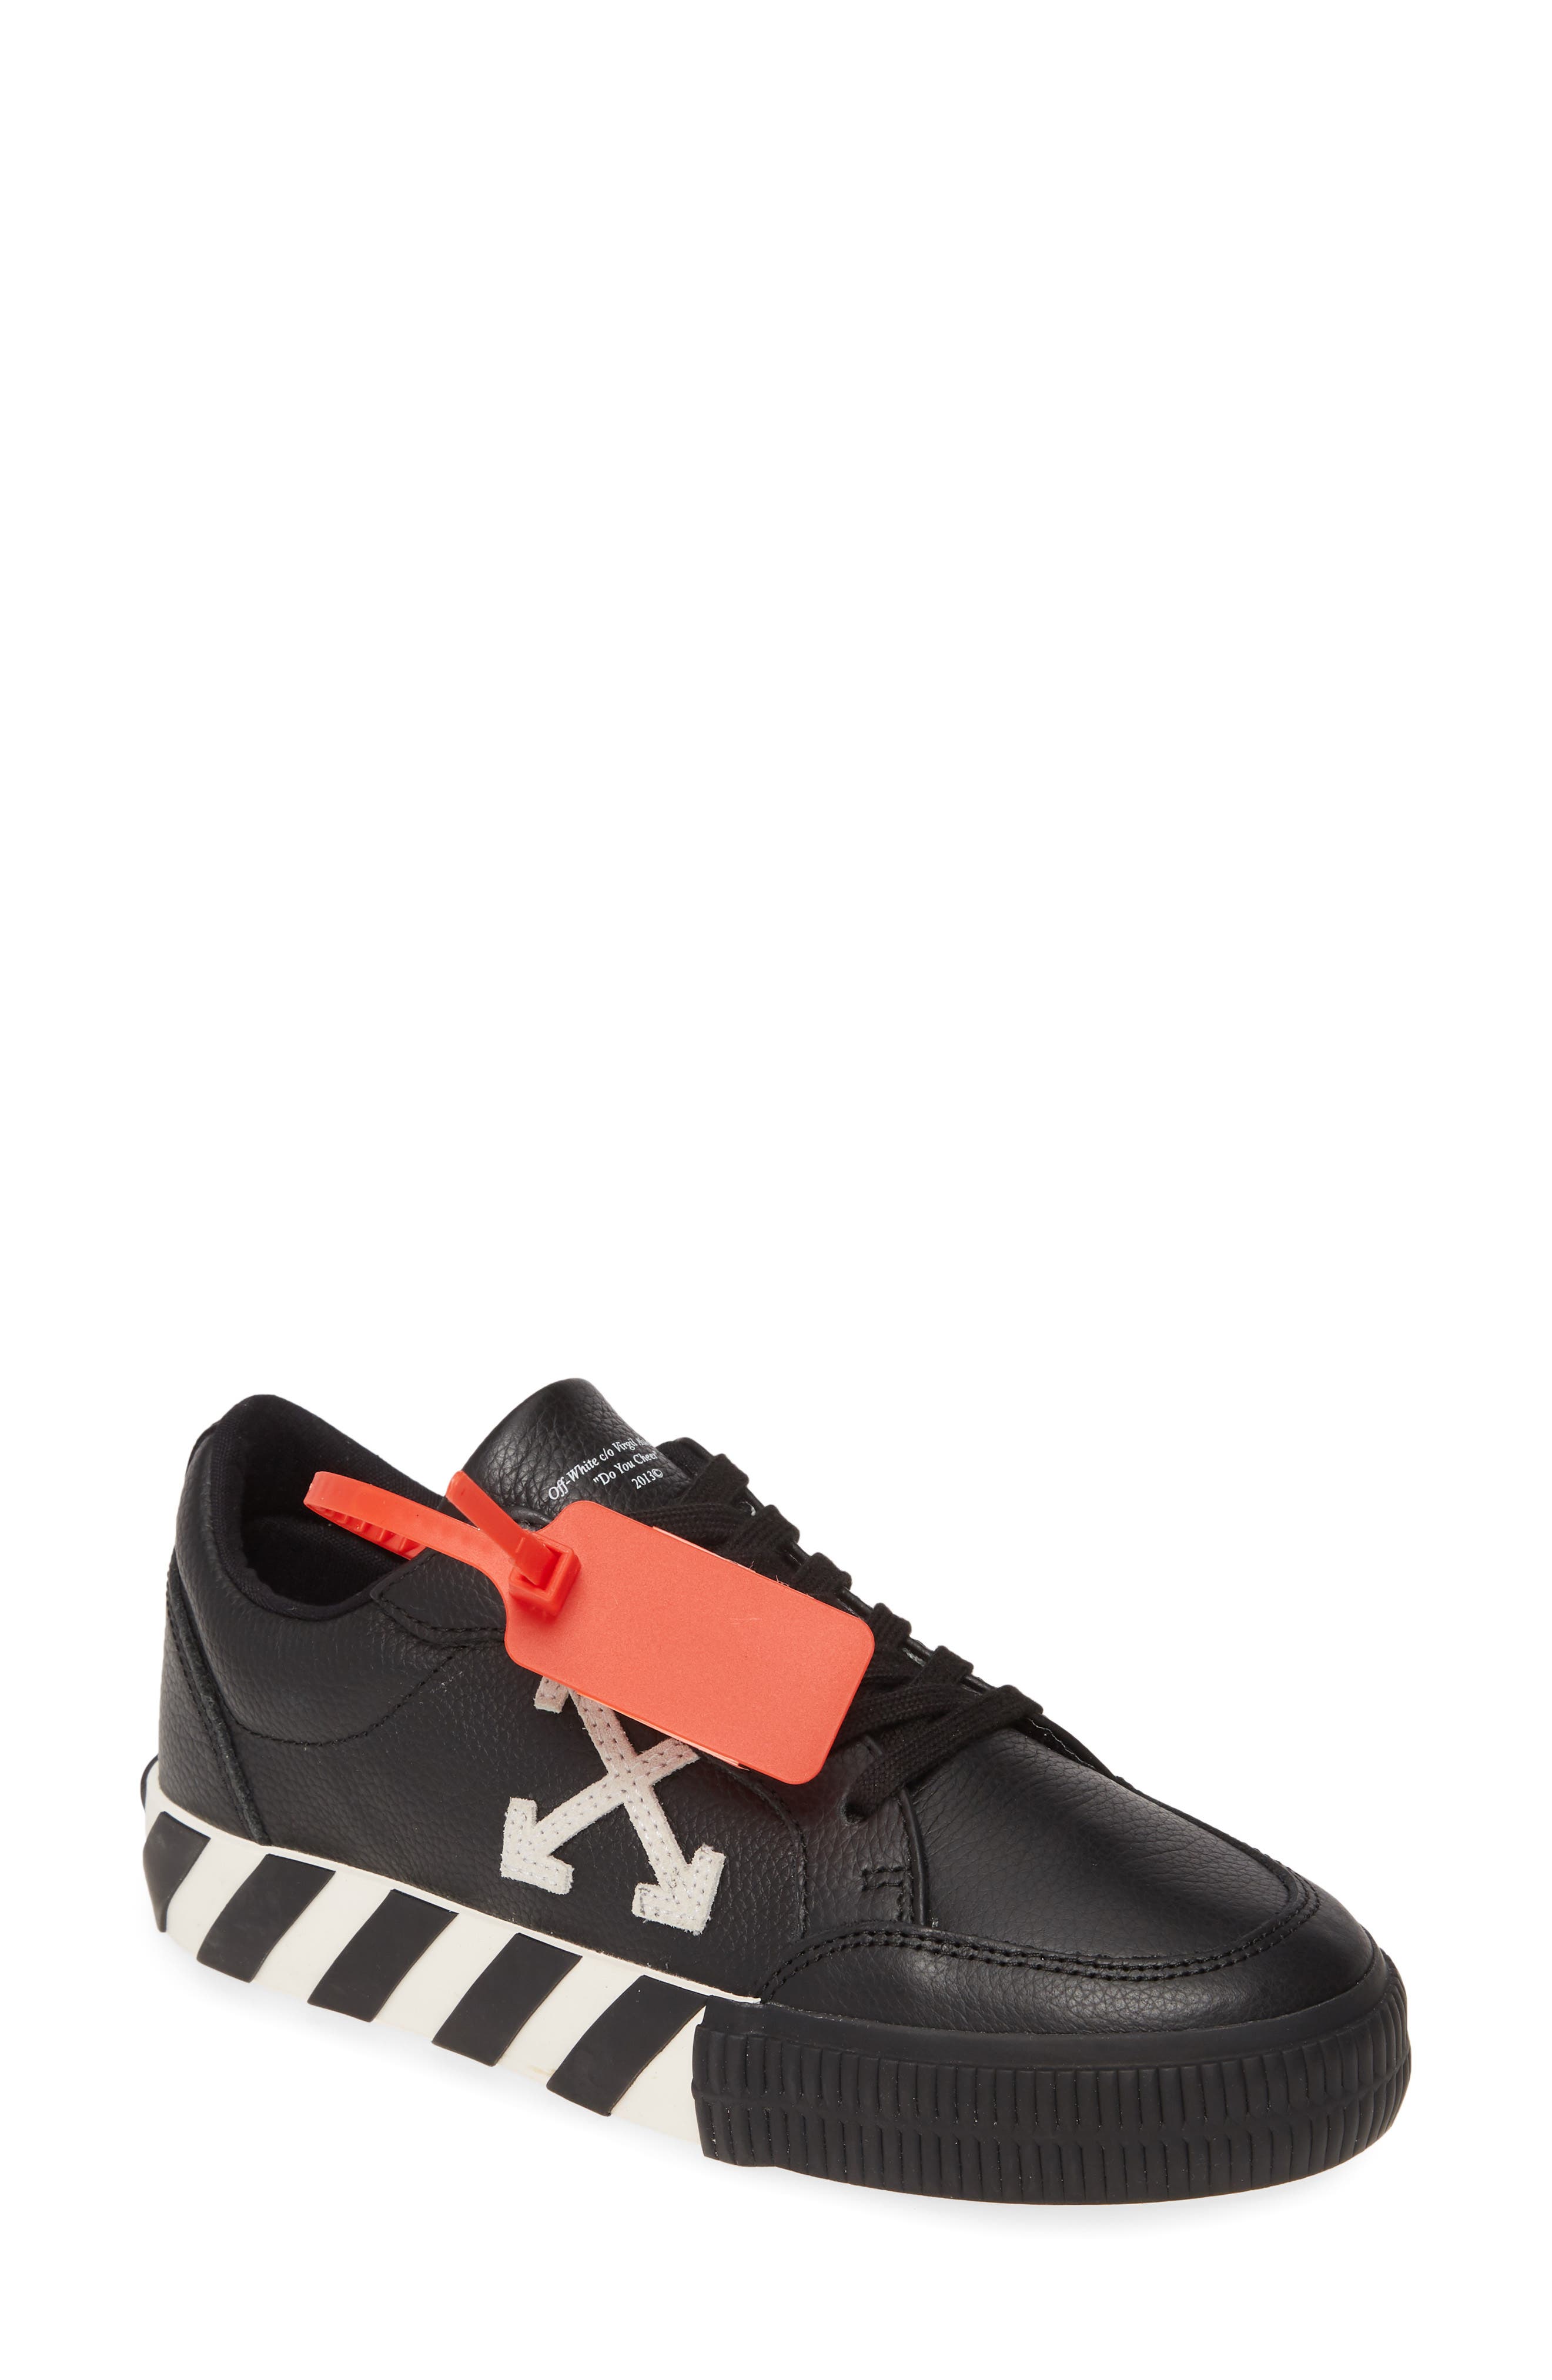 off white sneakers nordstrom